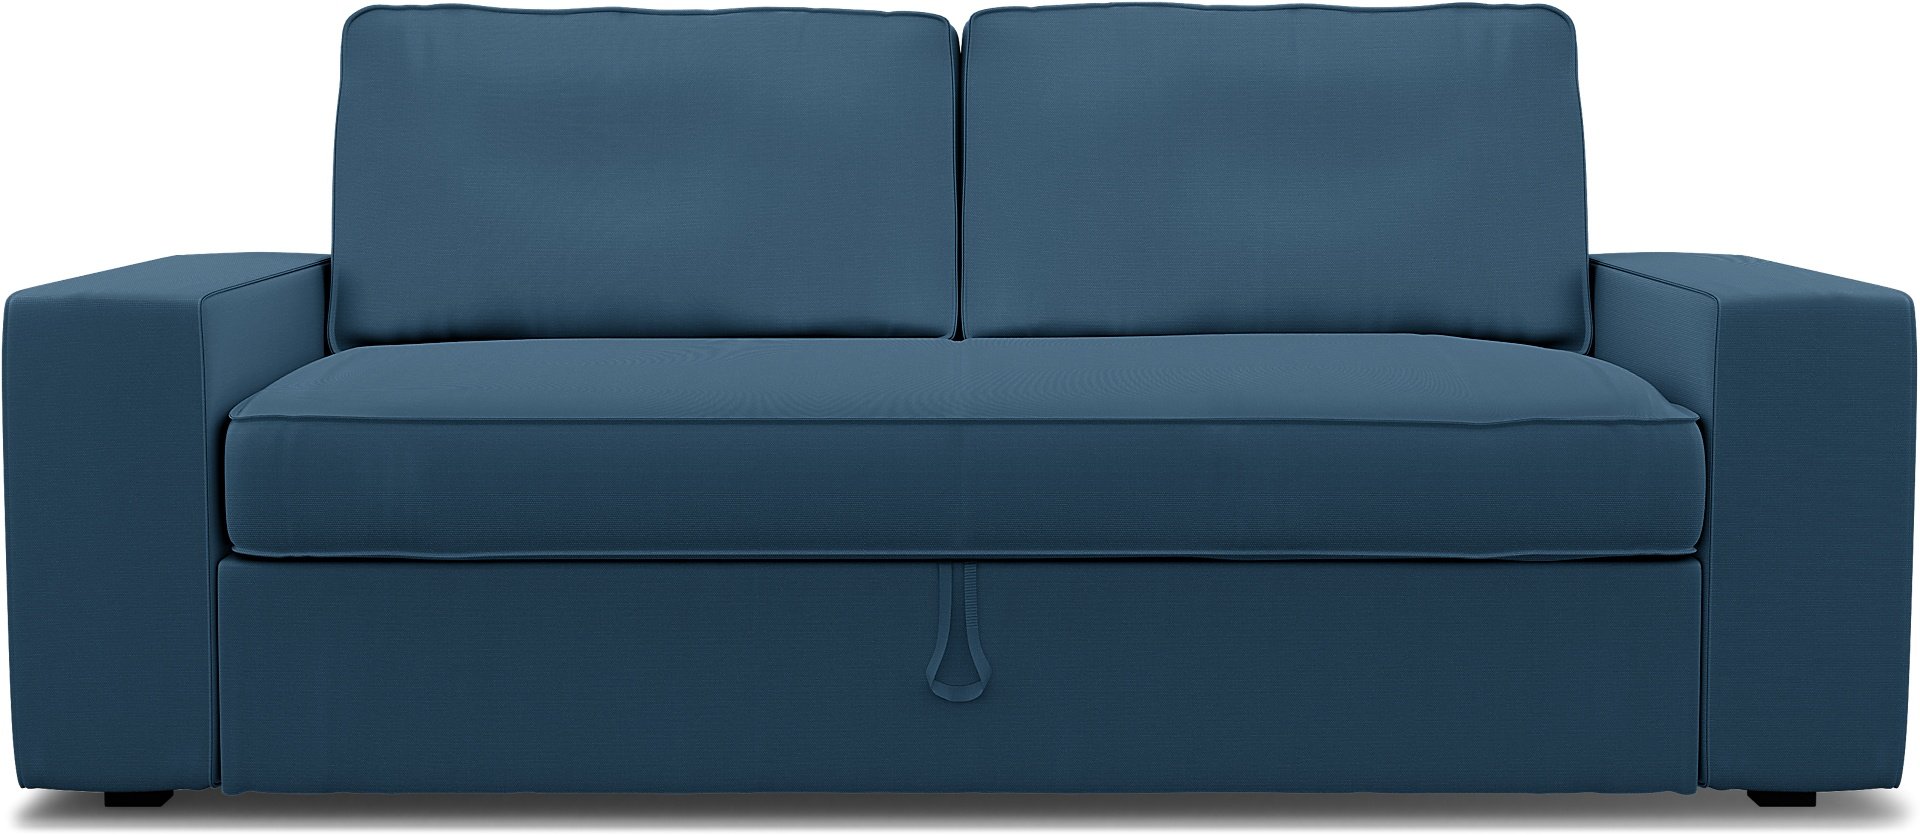 IKEA - Vilasund 3 seater sofa bed cover, Real Teal, Cotton - Bemz